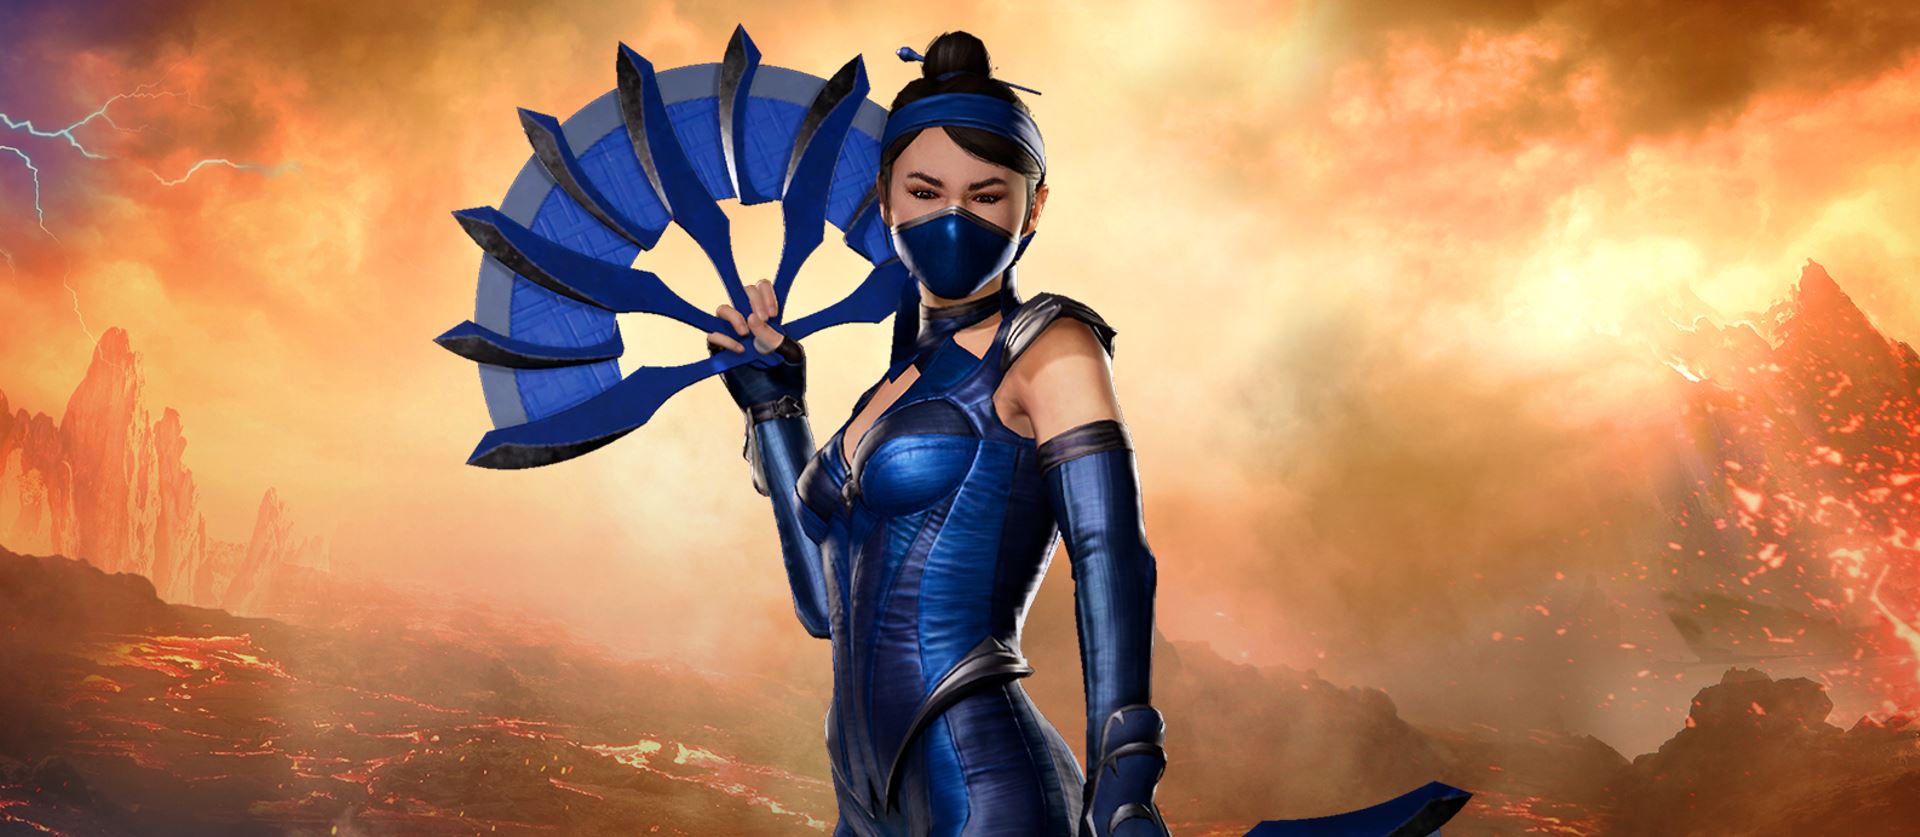 Mortal Kombat 11 Character Roster: Strengths, Weaknesses, and Tips